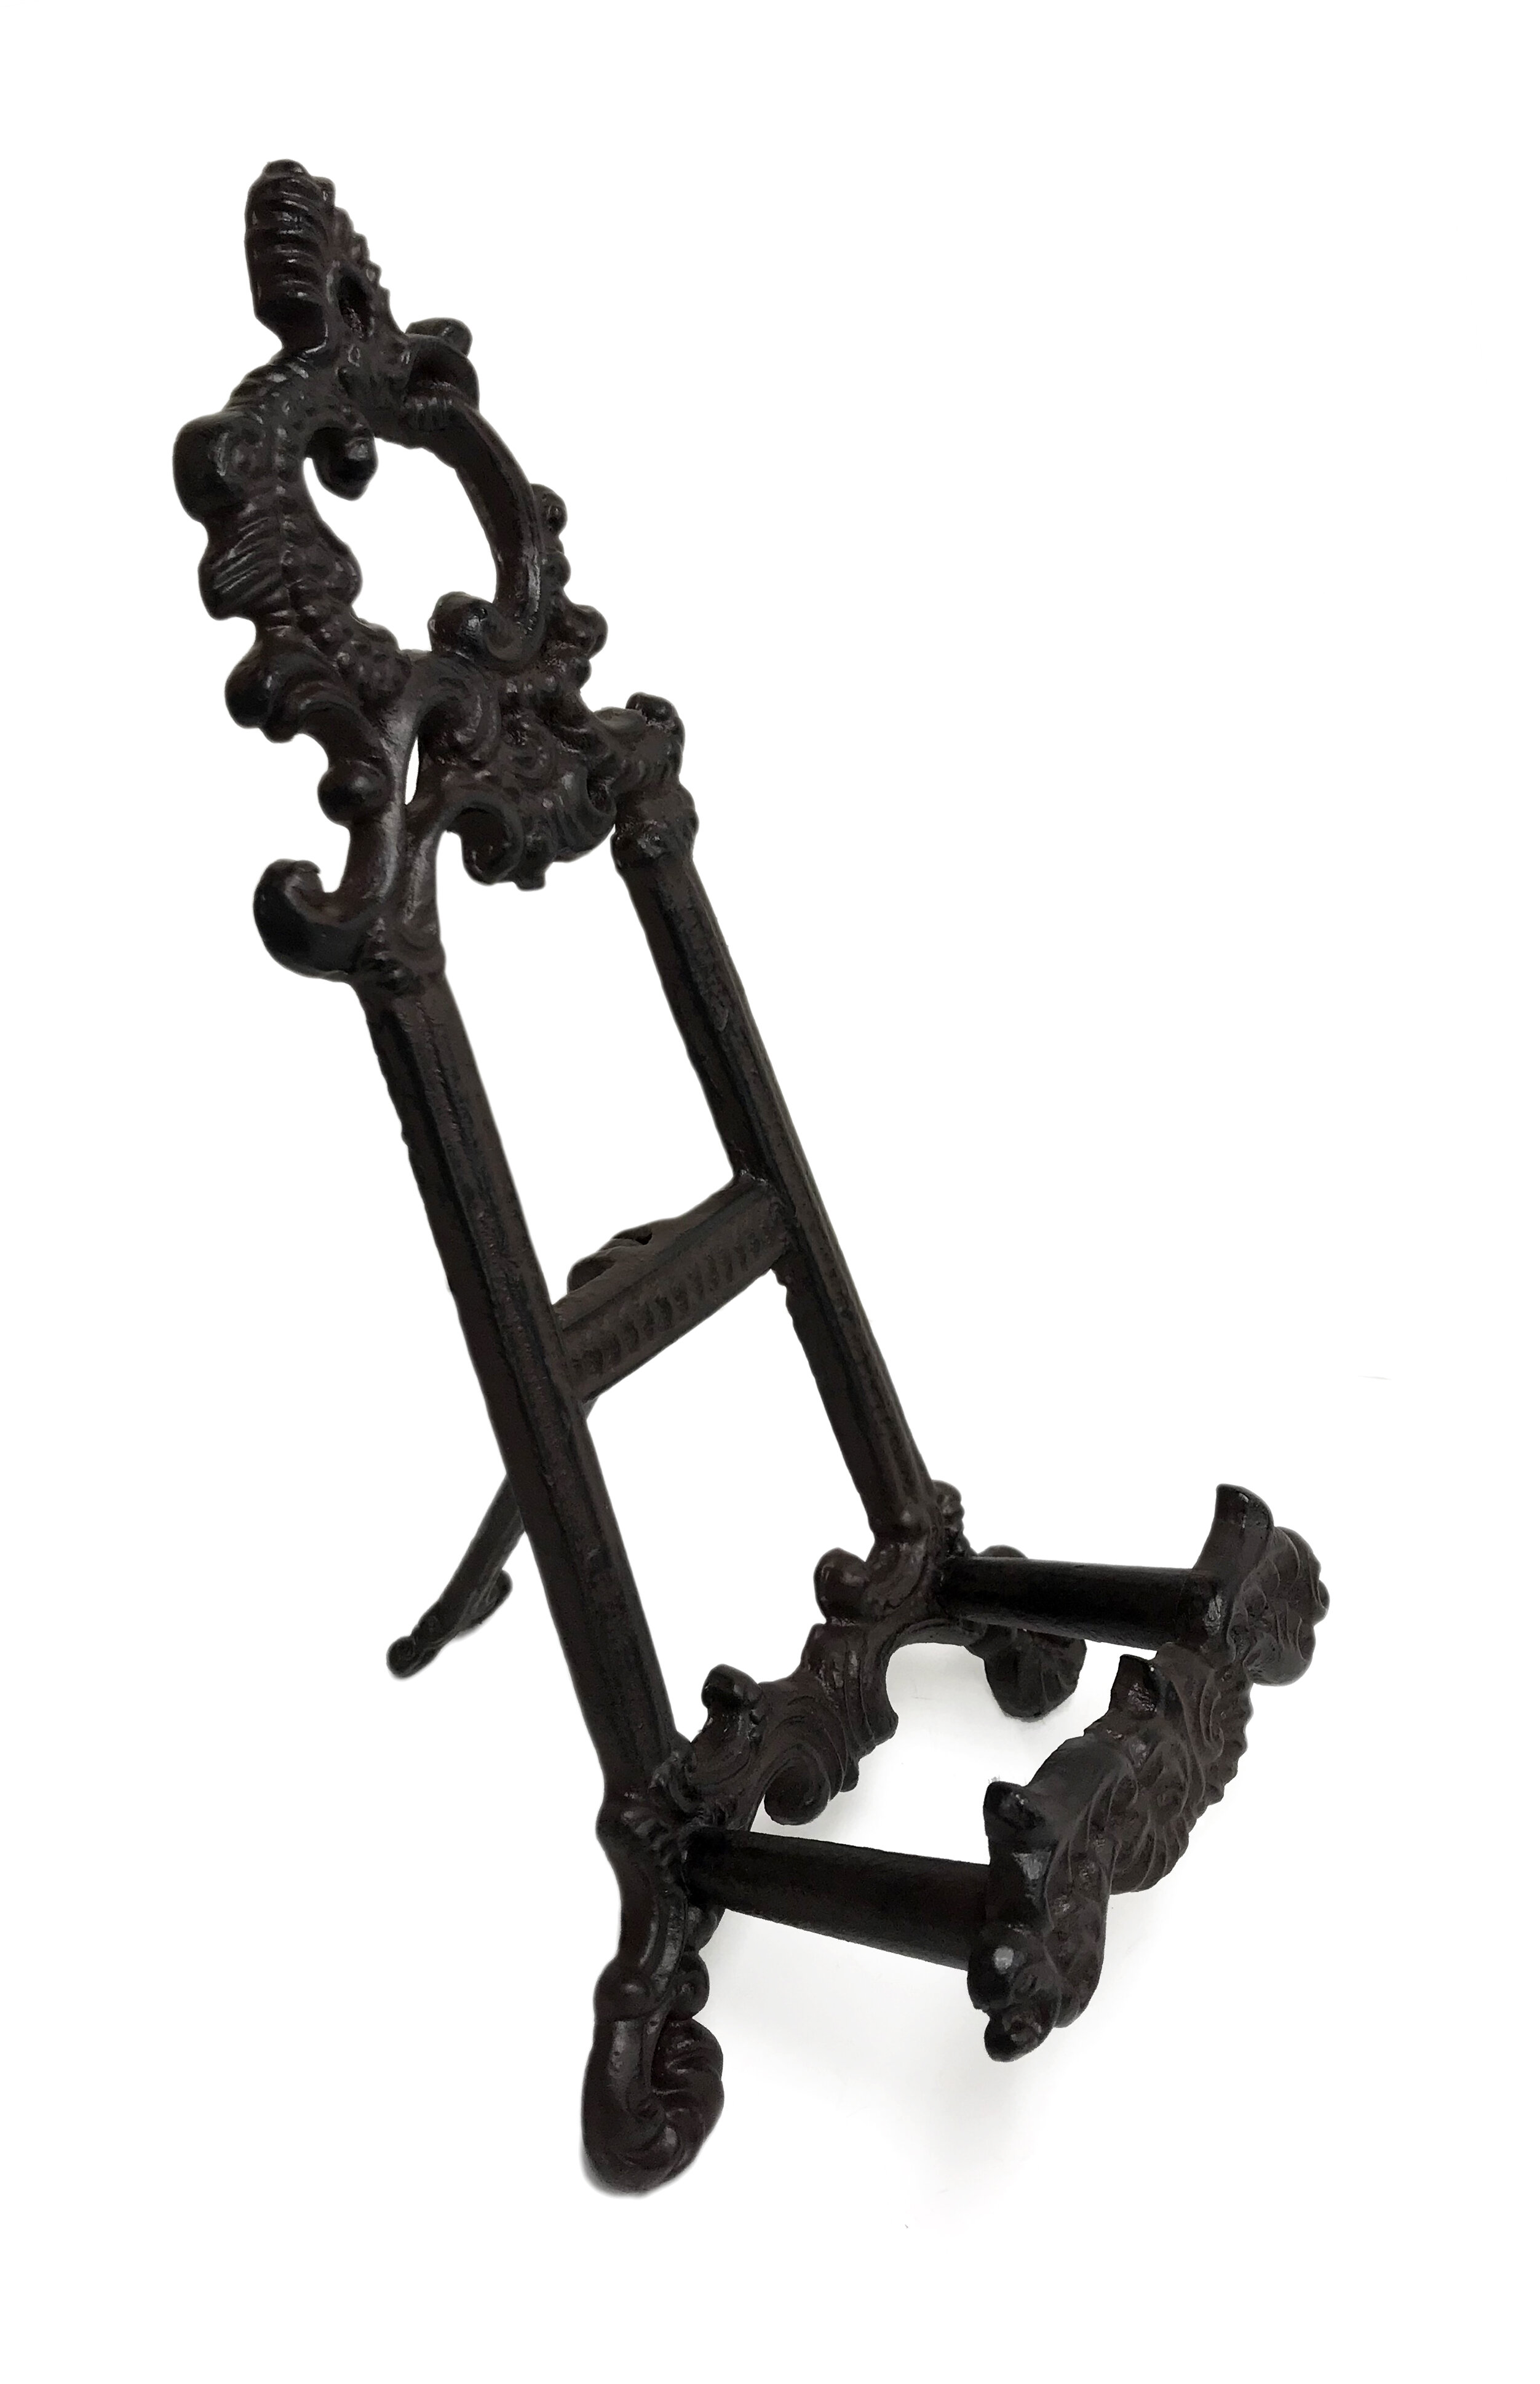 Deco 79 Rustic Black Iron Metal Table Display Easel 15" H x 9" W Set of 2 